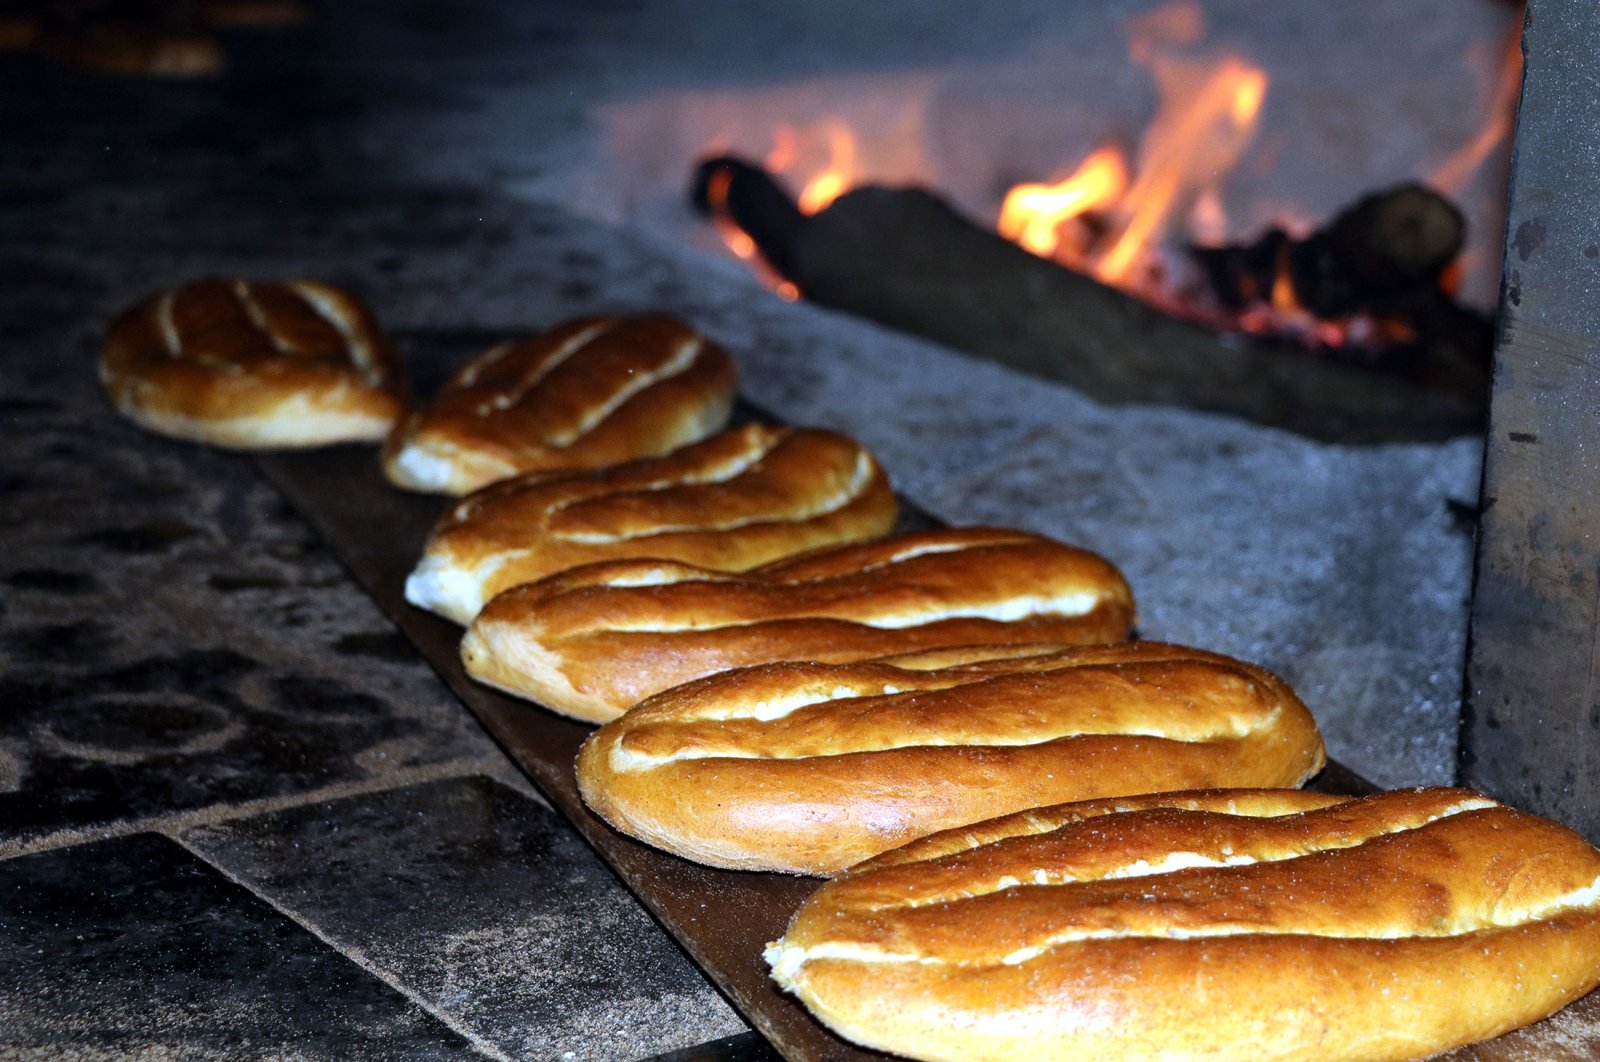 Finger buns are baked in the oven, Yozgat, Turkey, April 22, 2022. (AA Photo)